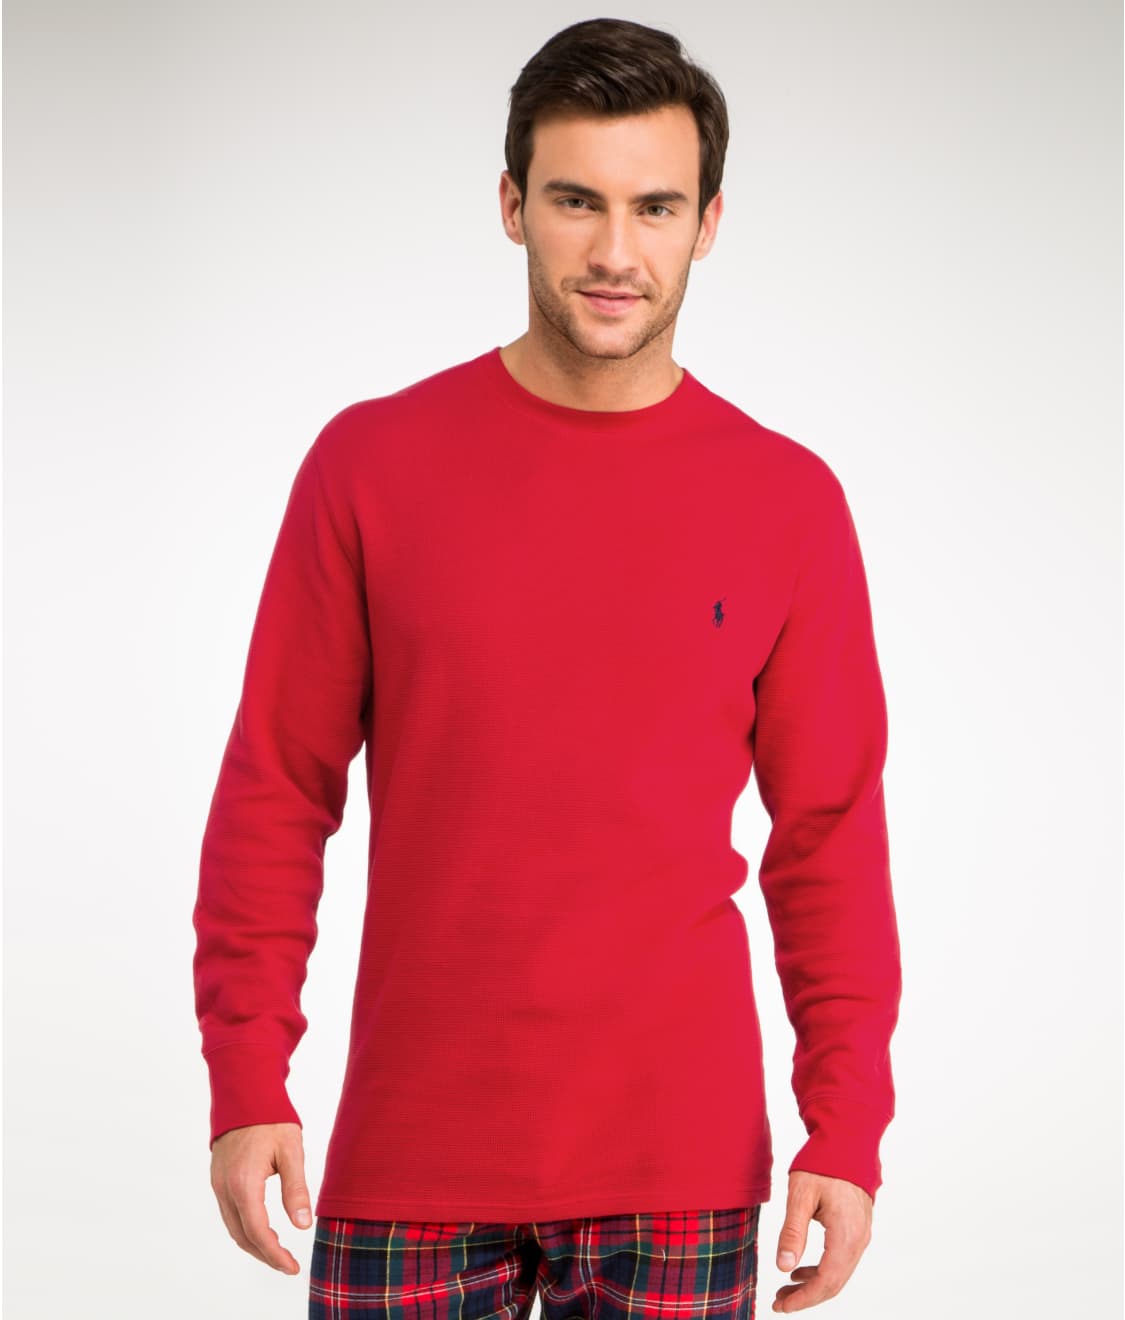 Polo Ralph Lauren Waffle Knit Crew Neck Top & Reviews | Bare Necessities  (Style P551)